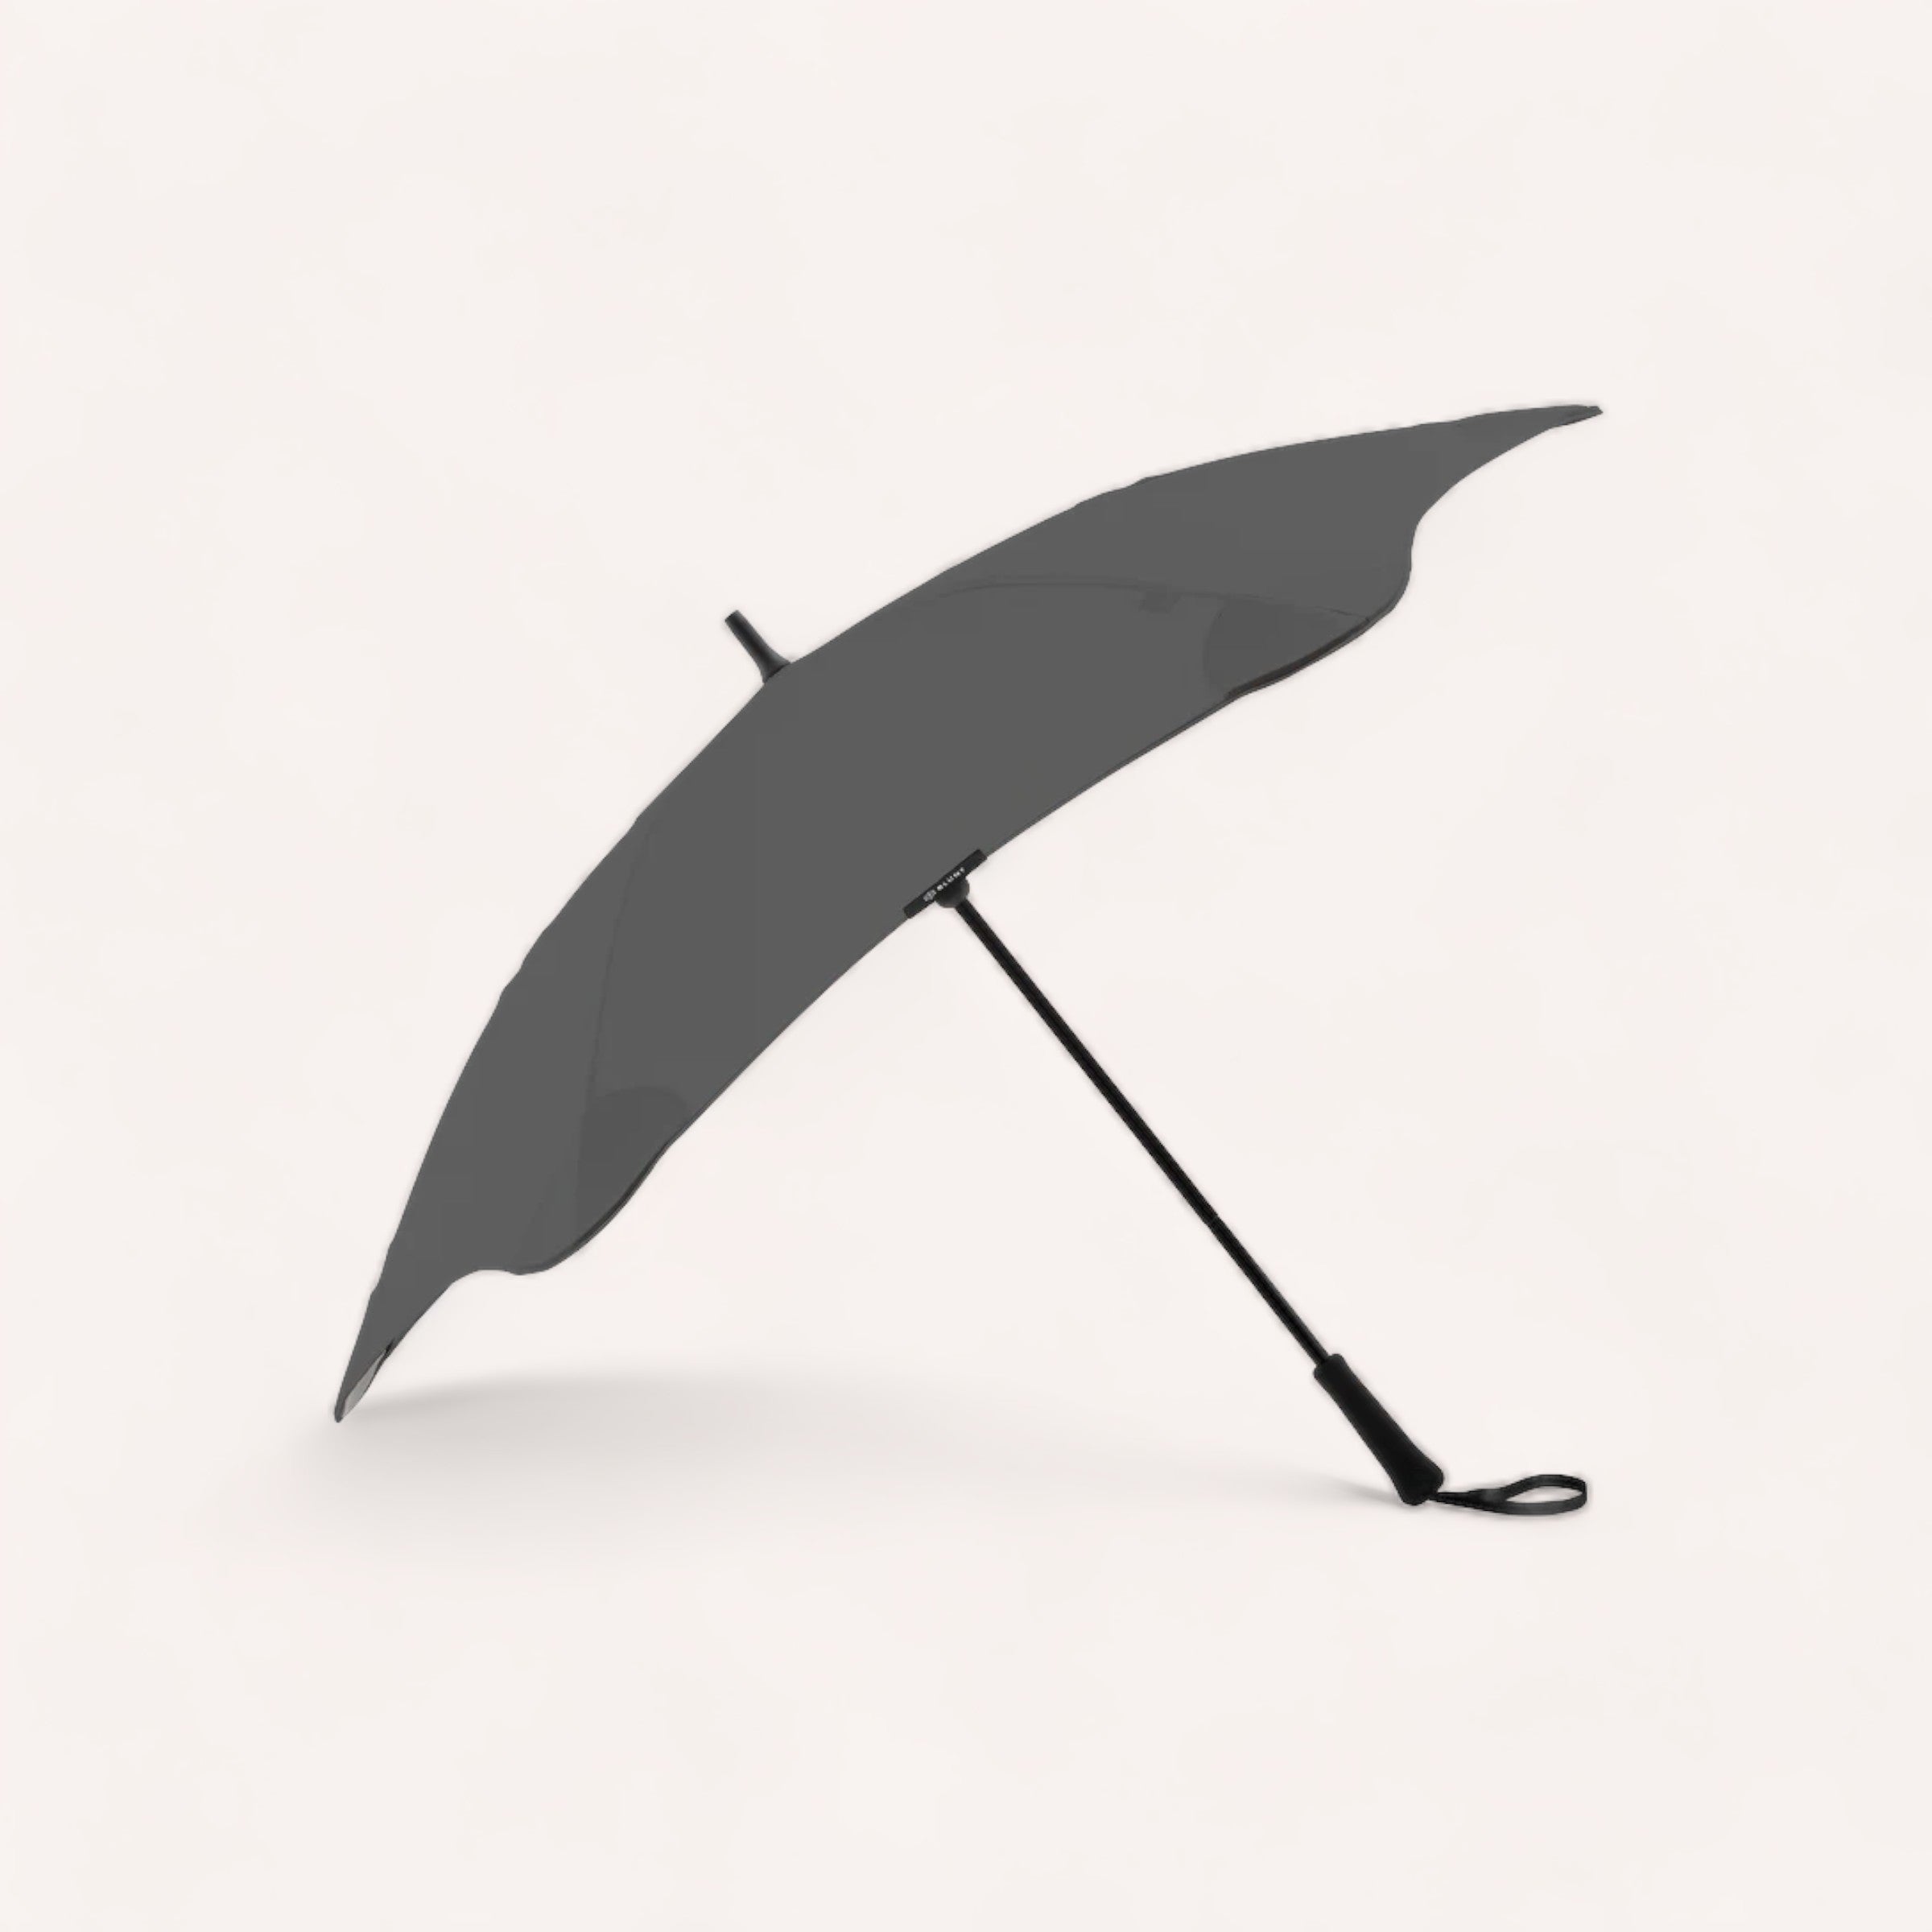 A black BLUNT Classic Umbrella Charcoal open and resting on its side against a white background.